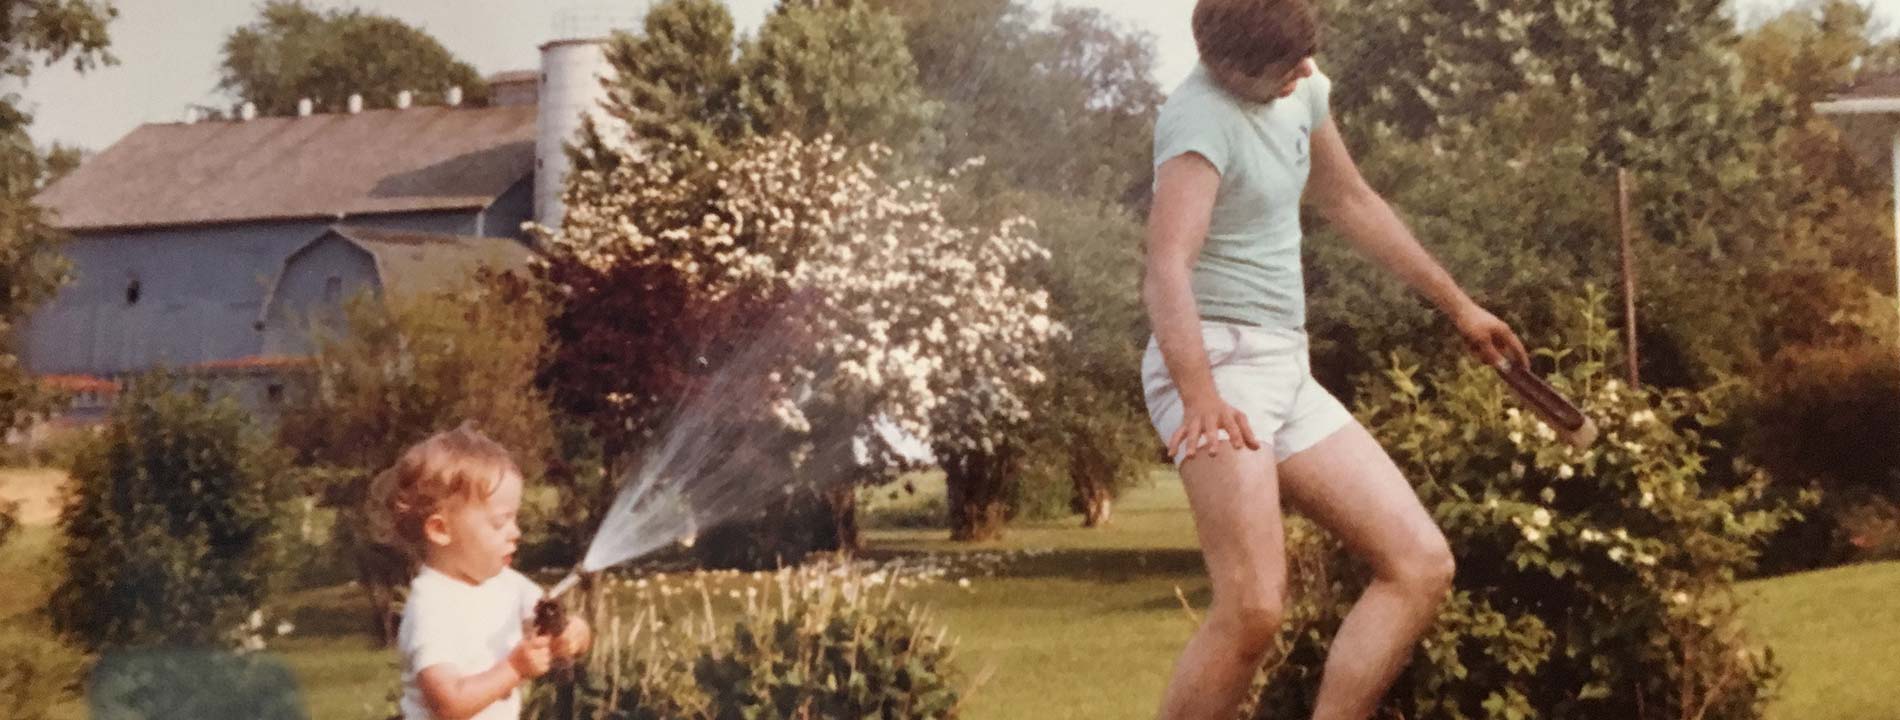 Young Ryan Martin spraying his dad with a water hose